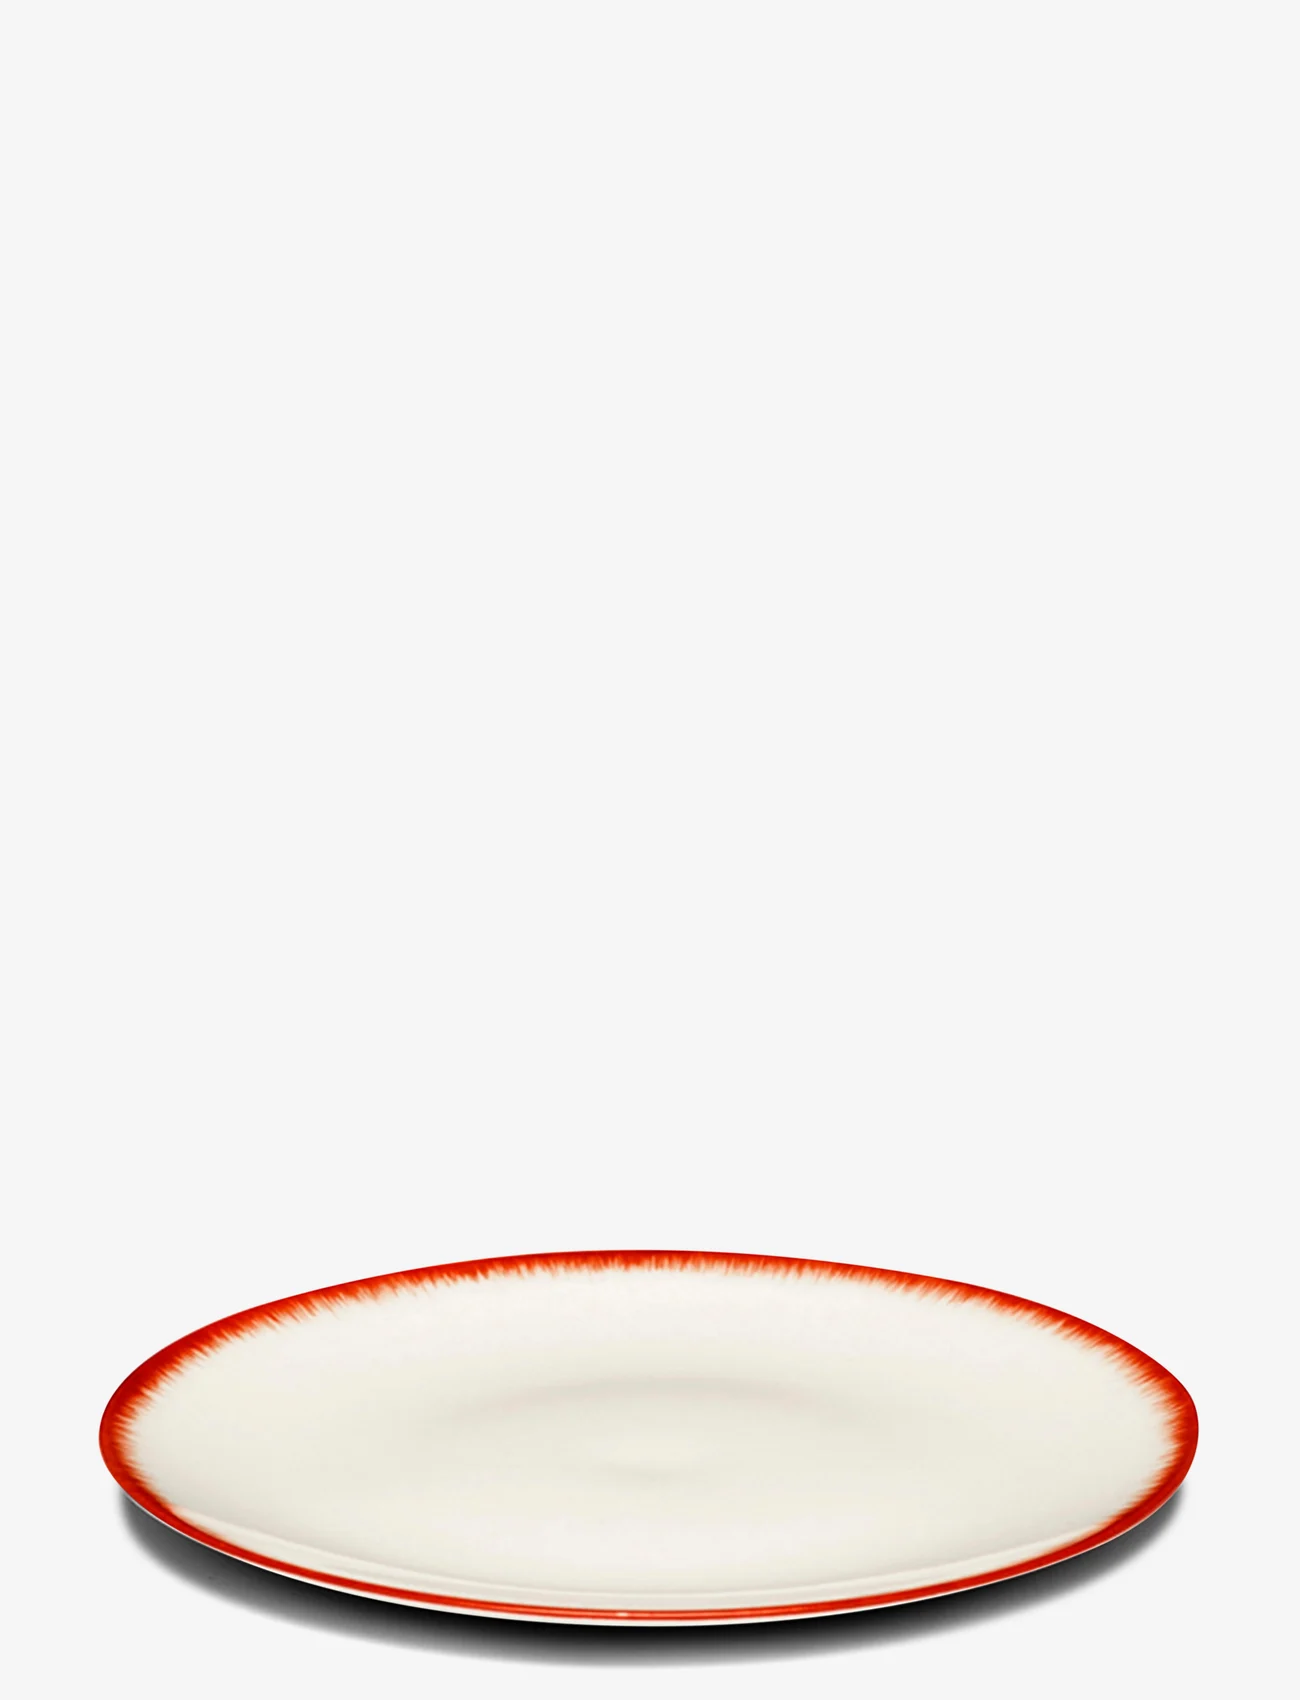 Serax - PLATE DÉ - small plates - off-white/red - 1